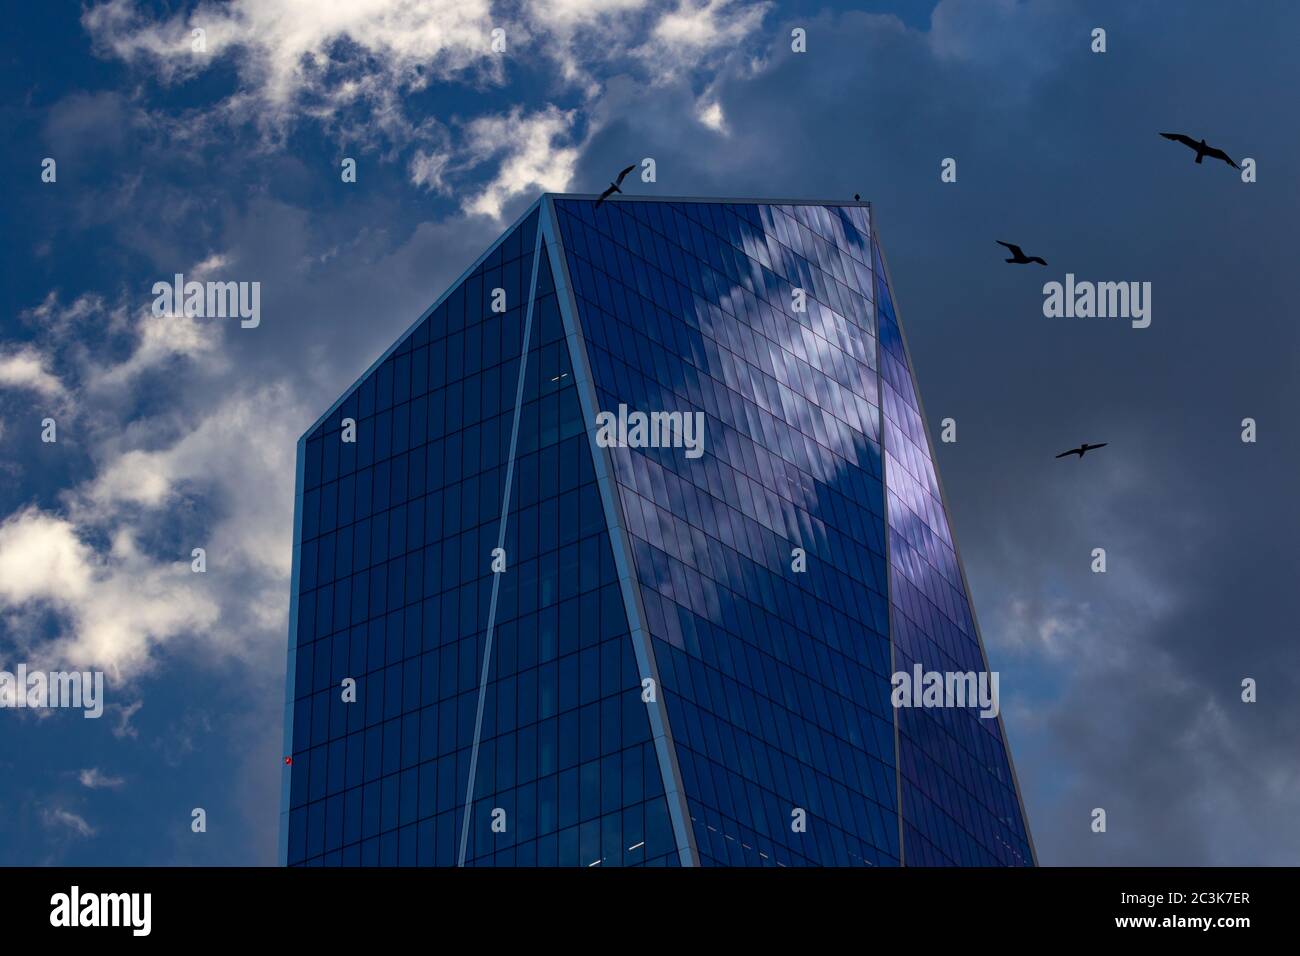 View looking up at The Scalpel with circling seagulls, appearing as if it were a modern cliff face, City of London Stock Photo